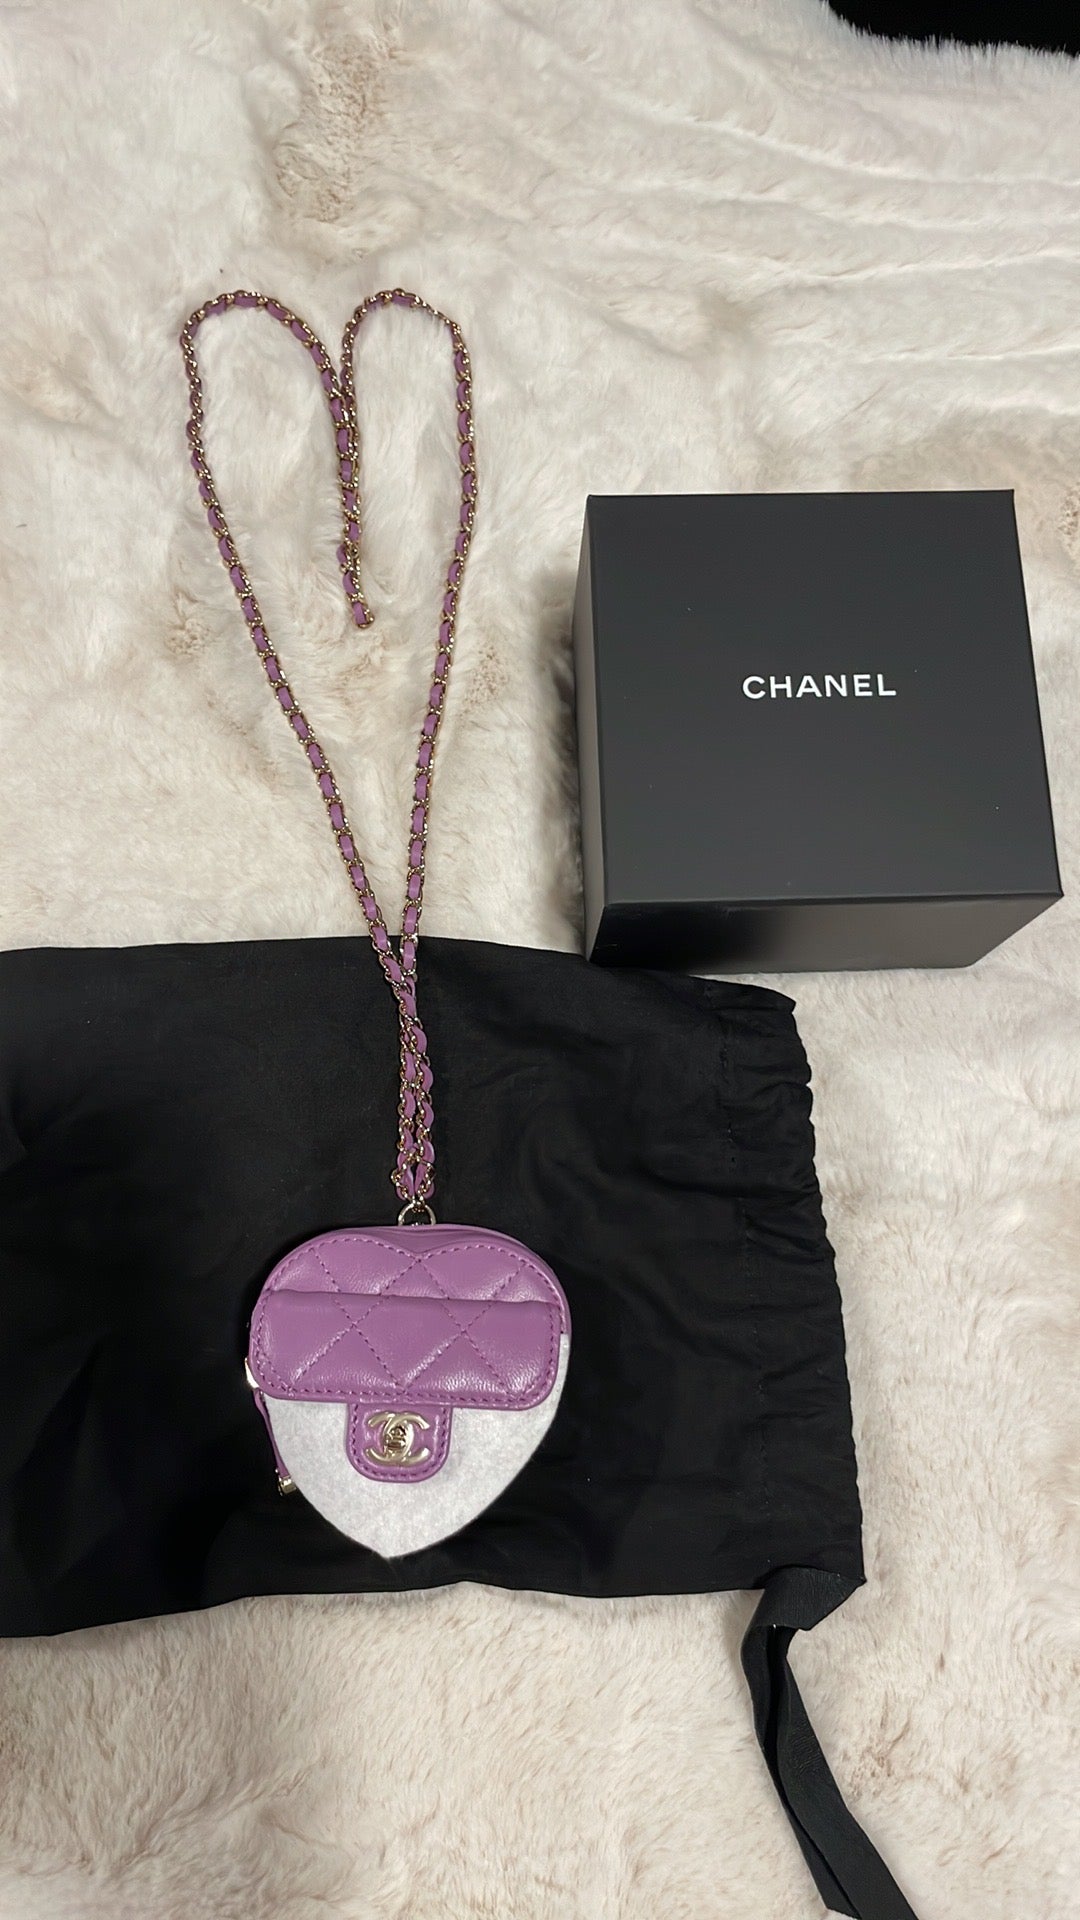 Chanel 22S Violet Purple Leather Heart Necklace Crossbody